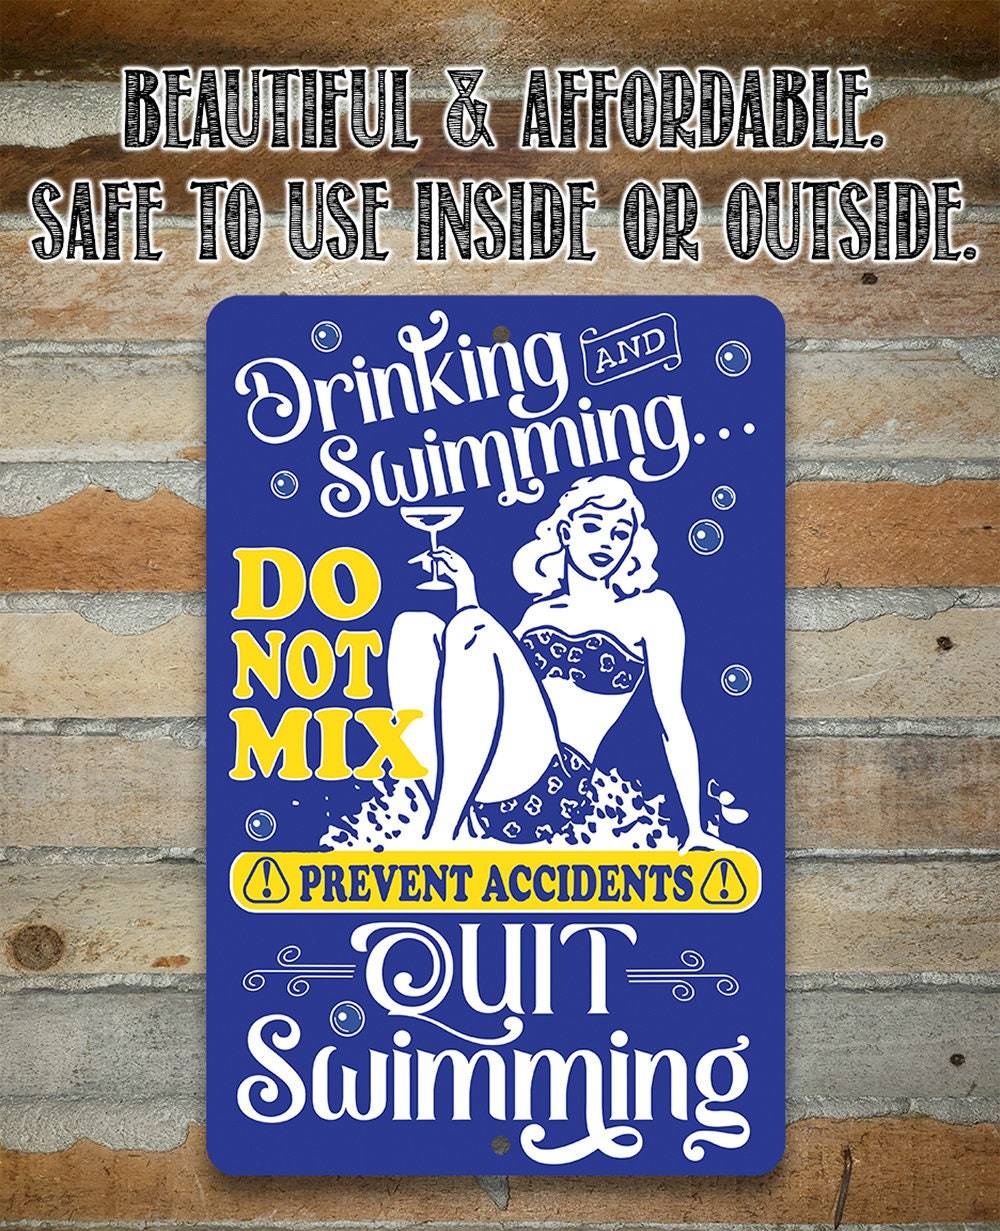 Drinking and Swimming Do Not Mix - Metal Sign | Lone Star Art.